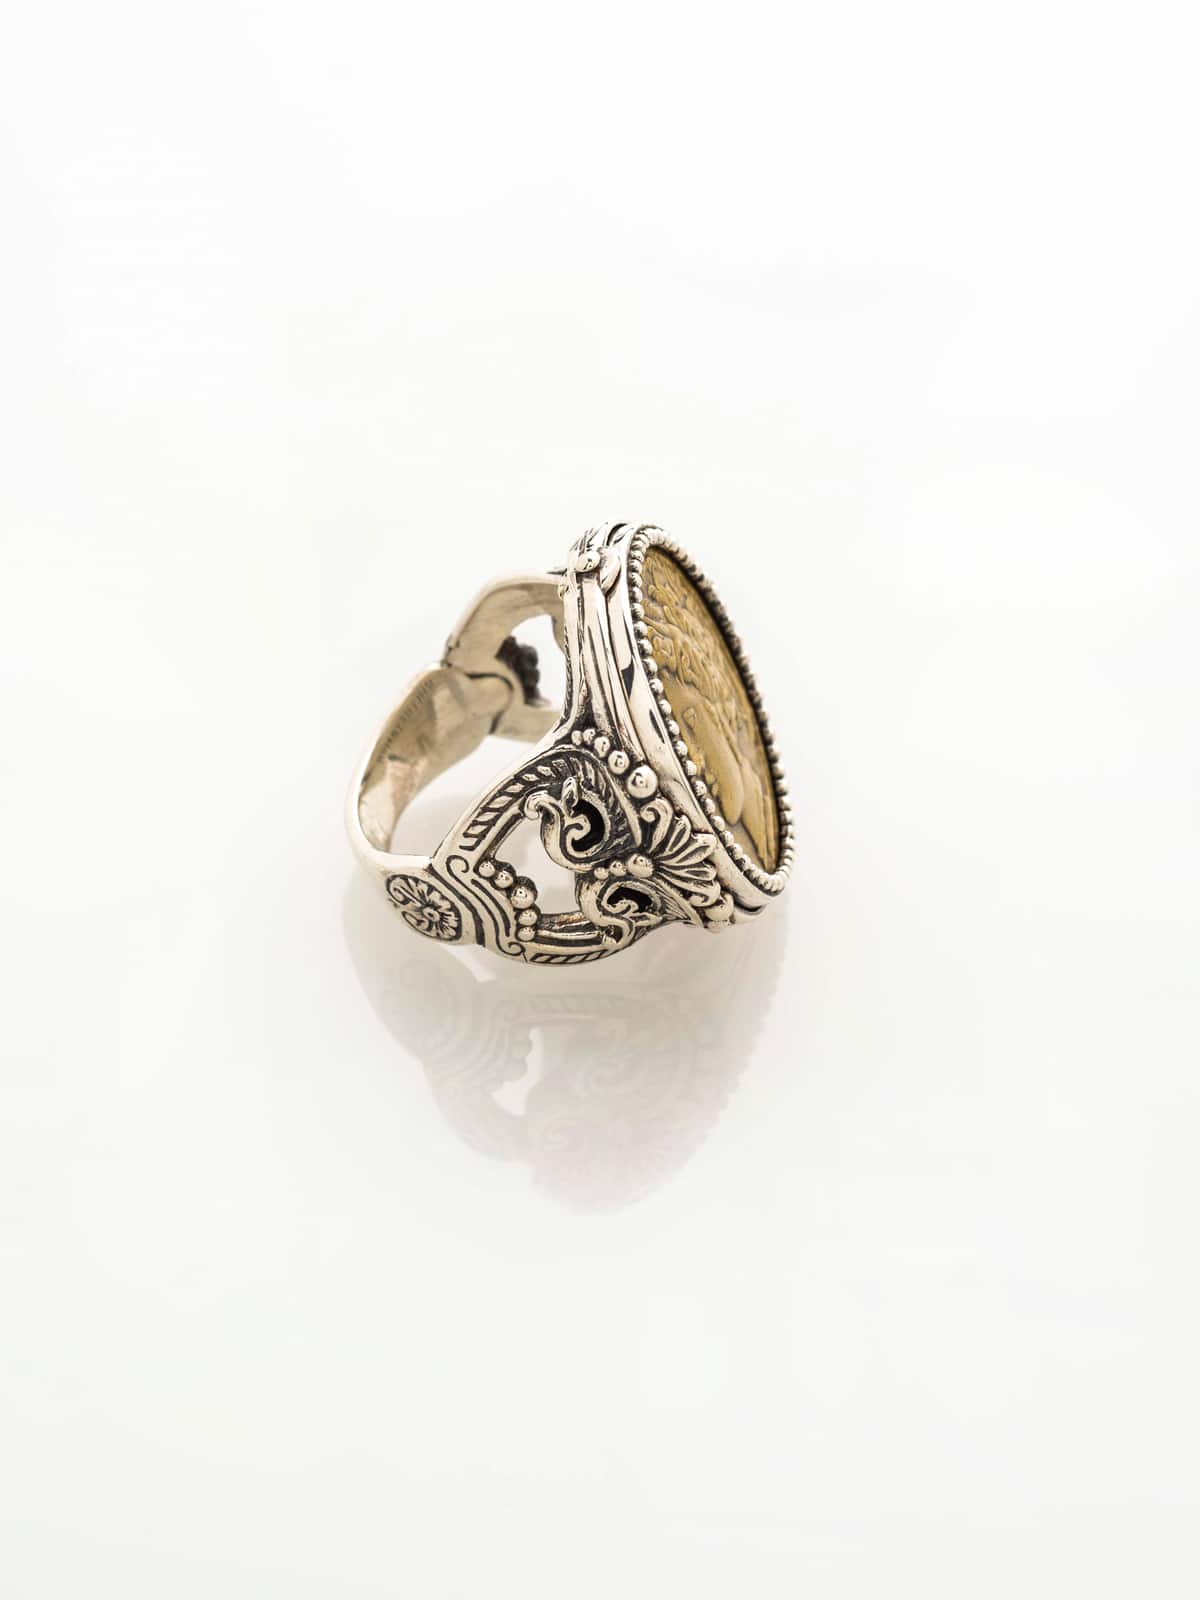 COIN RING IN STERLING SILVER AND BRONZE